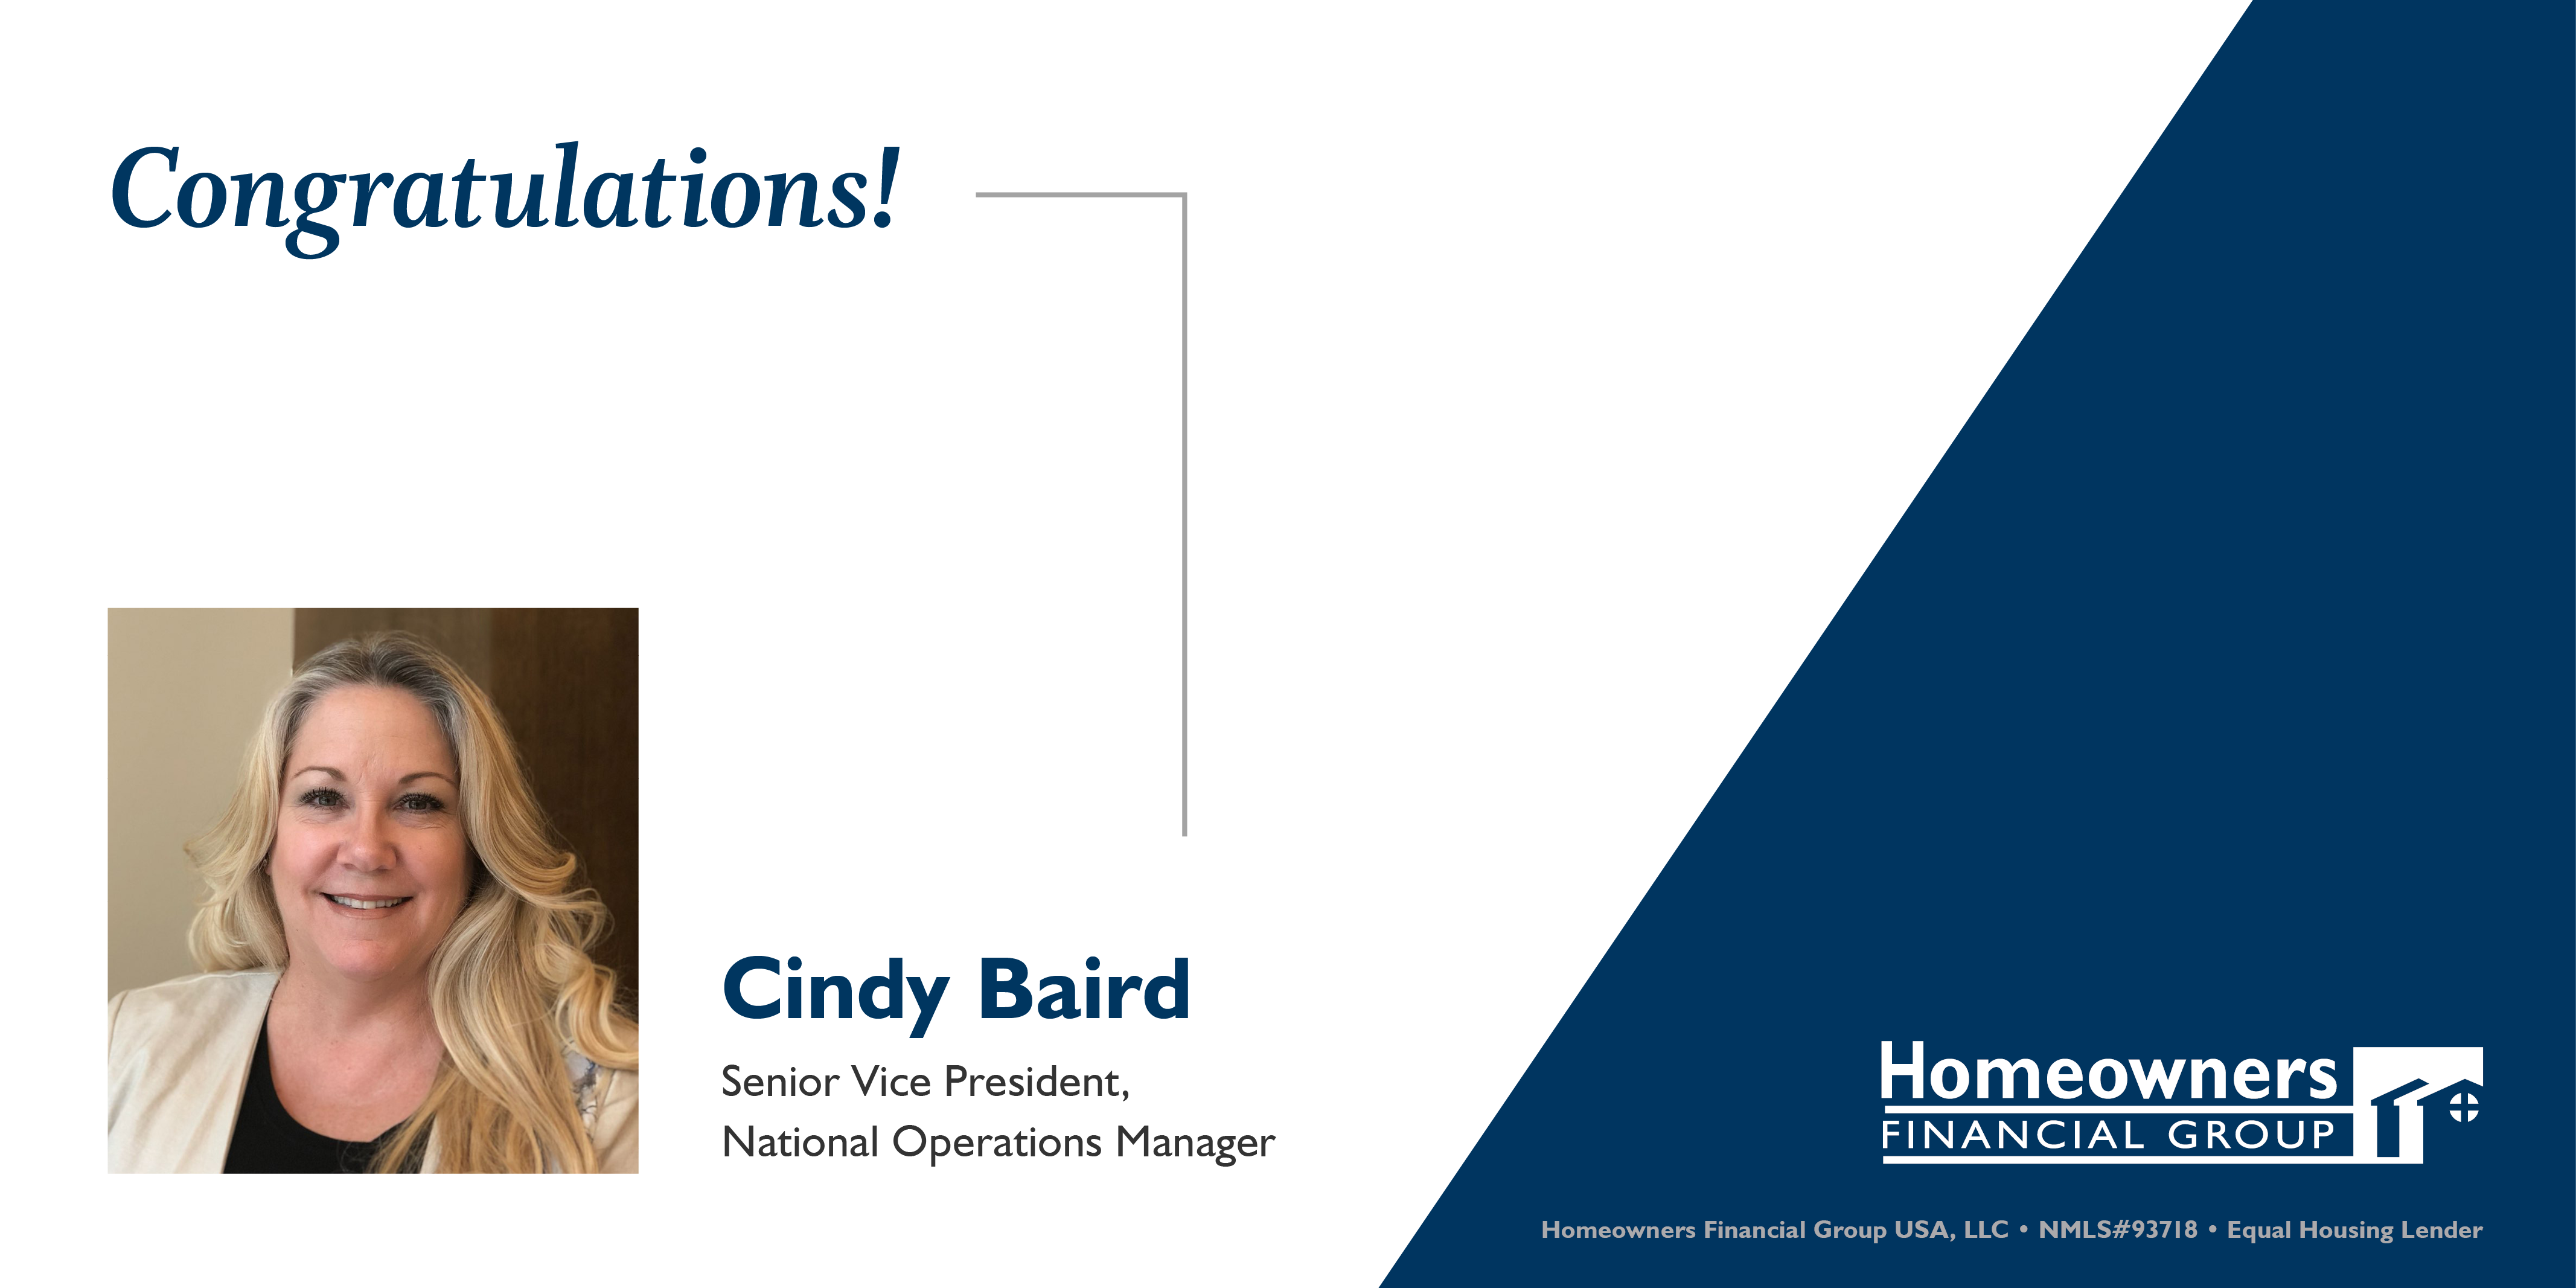 Cindy Baird Promoted to Senior Vice President, National Operations Manager